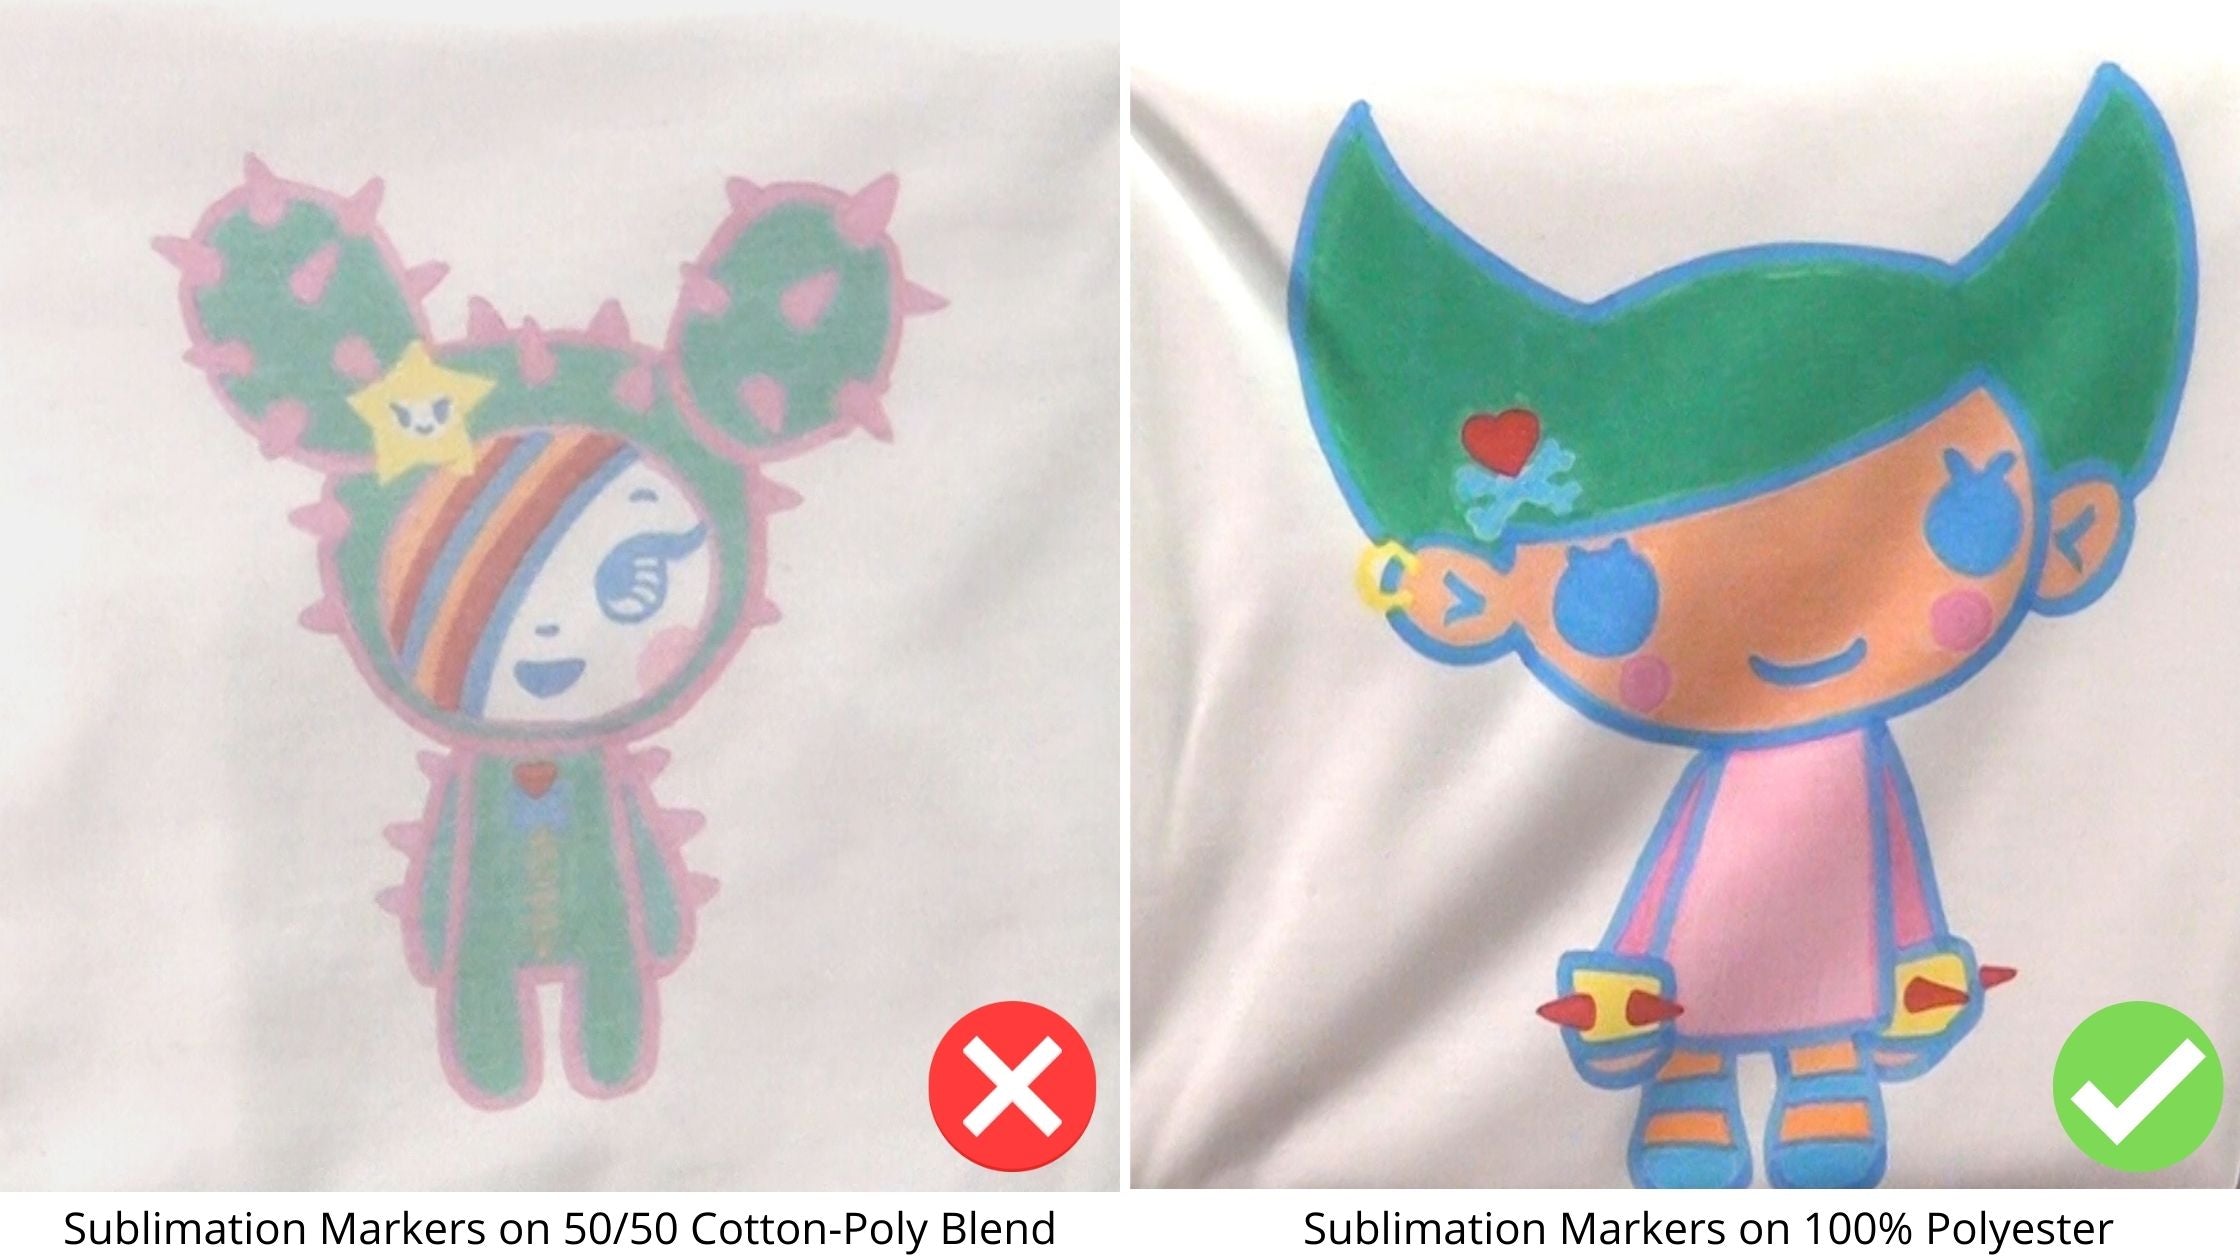 A side-by-side comparison showing the difference between using Siser Sublimation Markers on a 50/50 Cotton-Poly Blend T-Shirt (left) as opposed to a 100% Polyester T-Shirt (right).